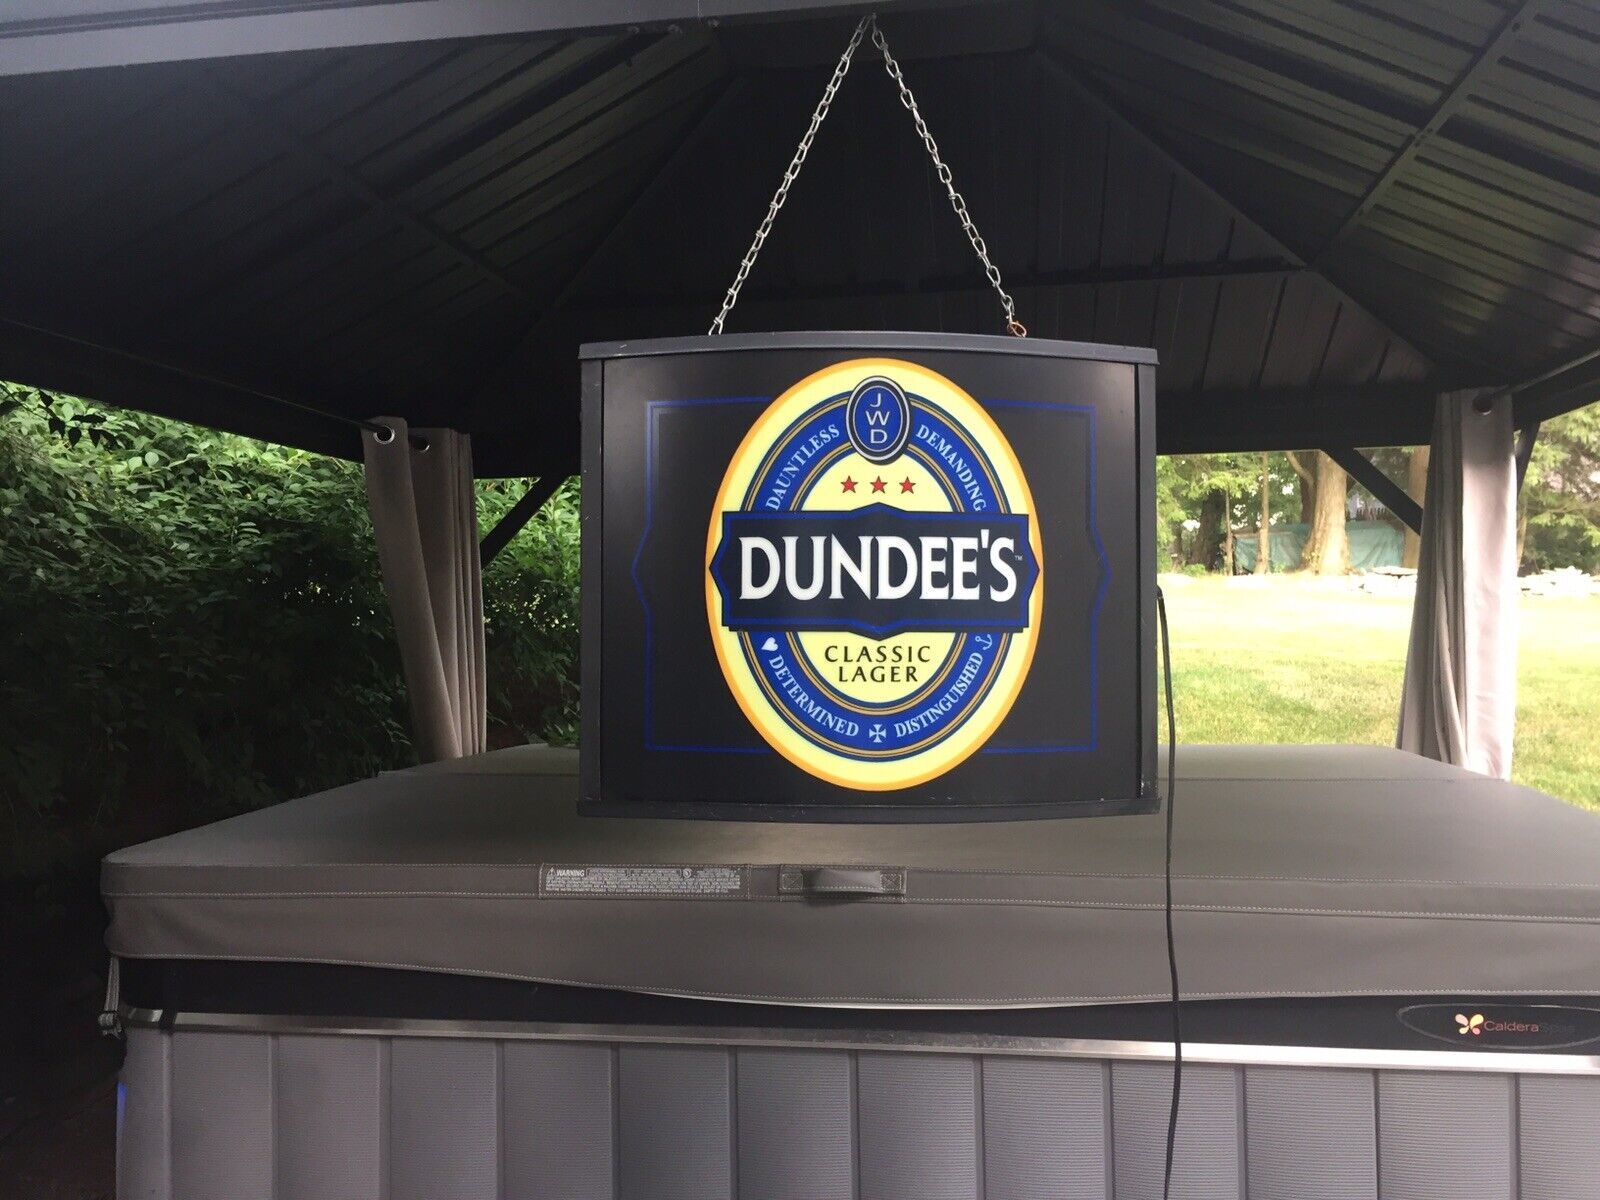 JW Dundee's Double Sided Hanging Beer Sign Excellent Condition Complete Working